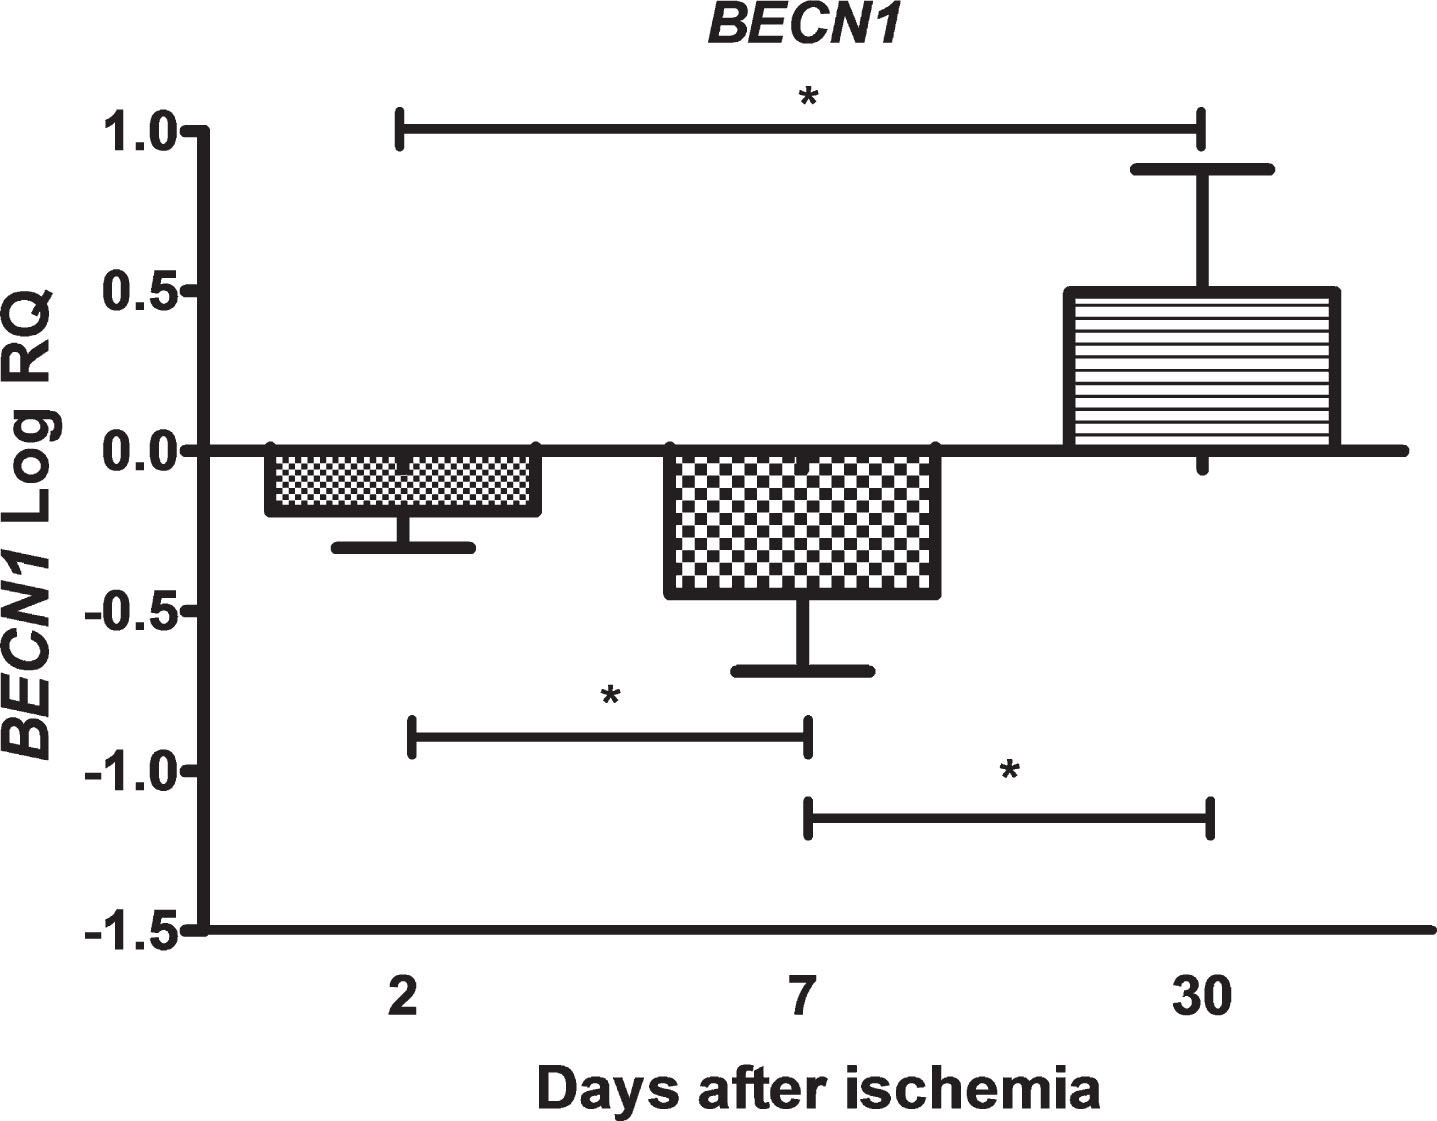 The mean expression levels of BECN1 gene in the hippocampus CA3 area in rats 2 (n = 8), 7 (n = 8), and 30 (n = 8) days after brain ischemia. Marked SD, standard deviation. Indicated statistically significant differences in levels of gene expression between 2 and 7 (z = 3.129, p = 0.0052), 2 and 30 (z = 3.845, p = 0.0003), and between 7 and 30 (z = 5.336, p = 0.00001) days after ischemia (Kruskal-Wallis test). *p≤0.01.